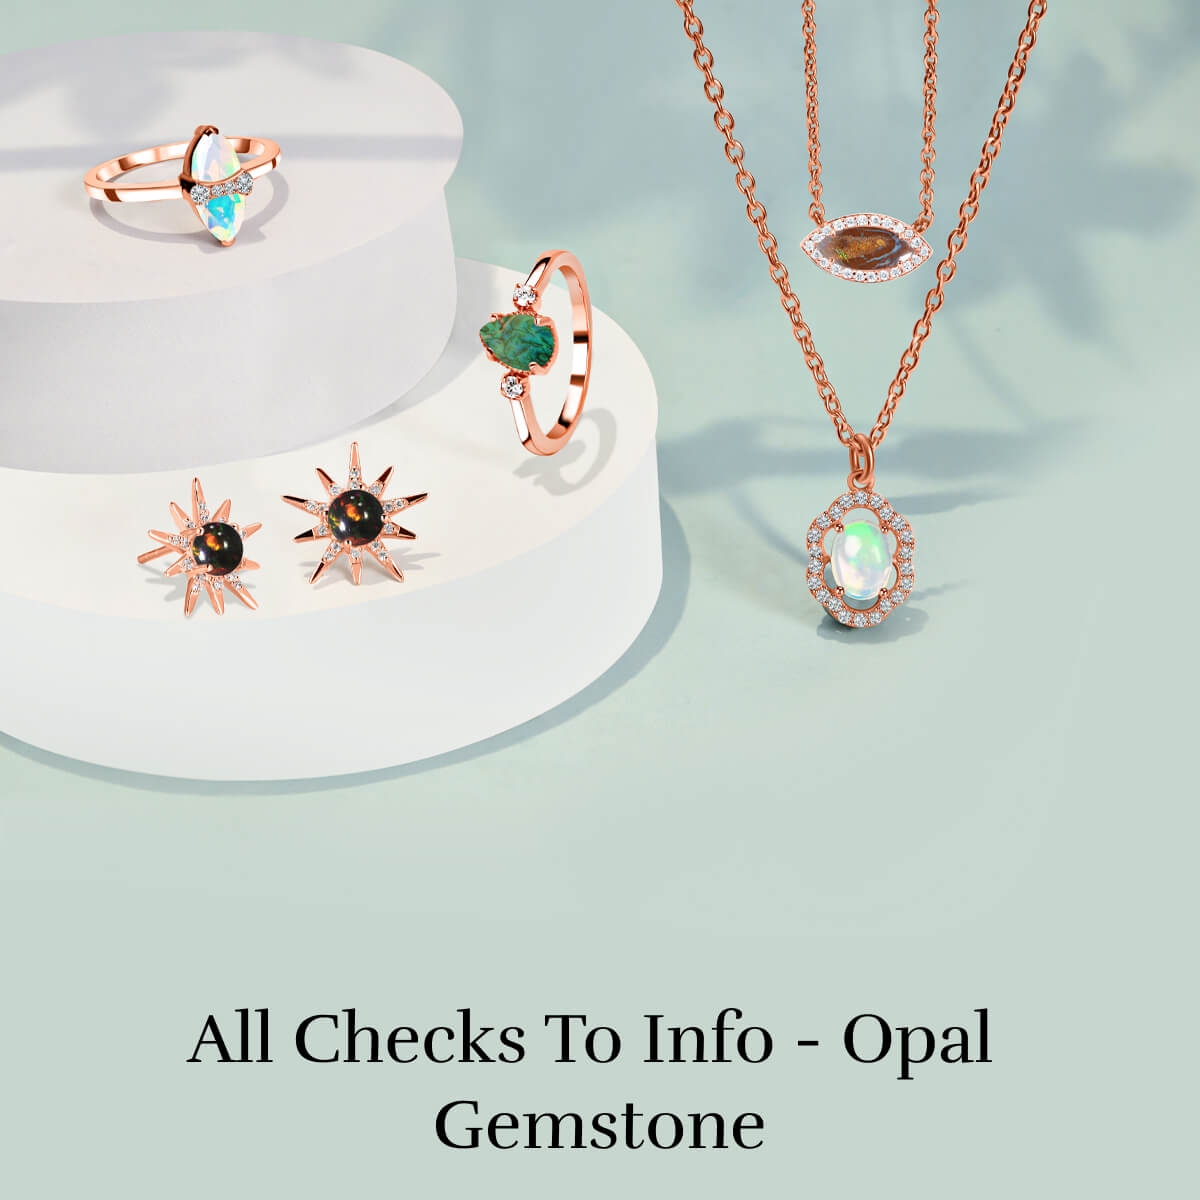 What is Opal